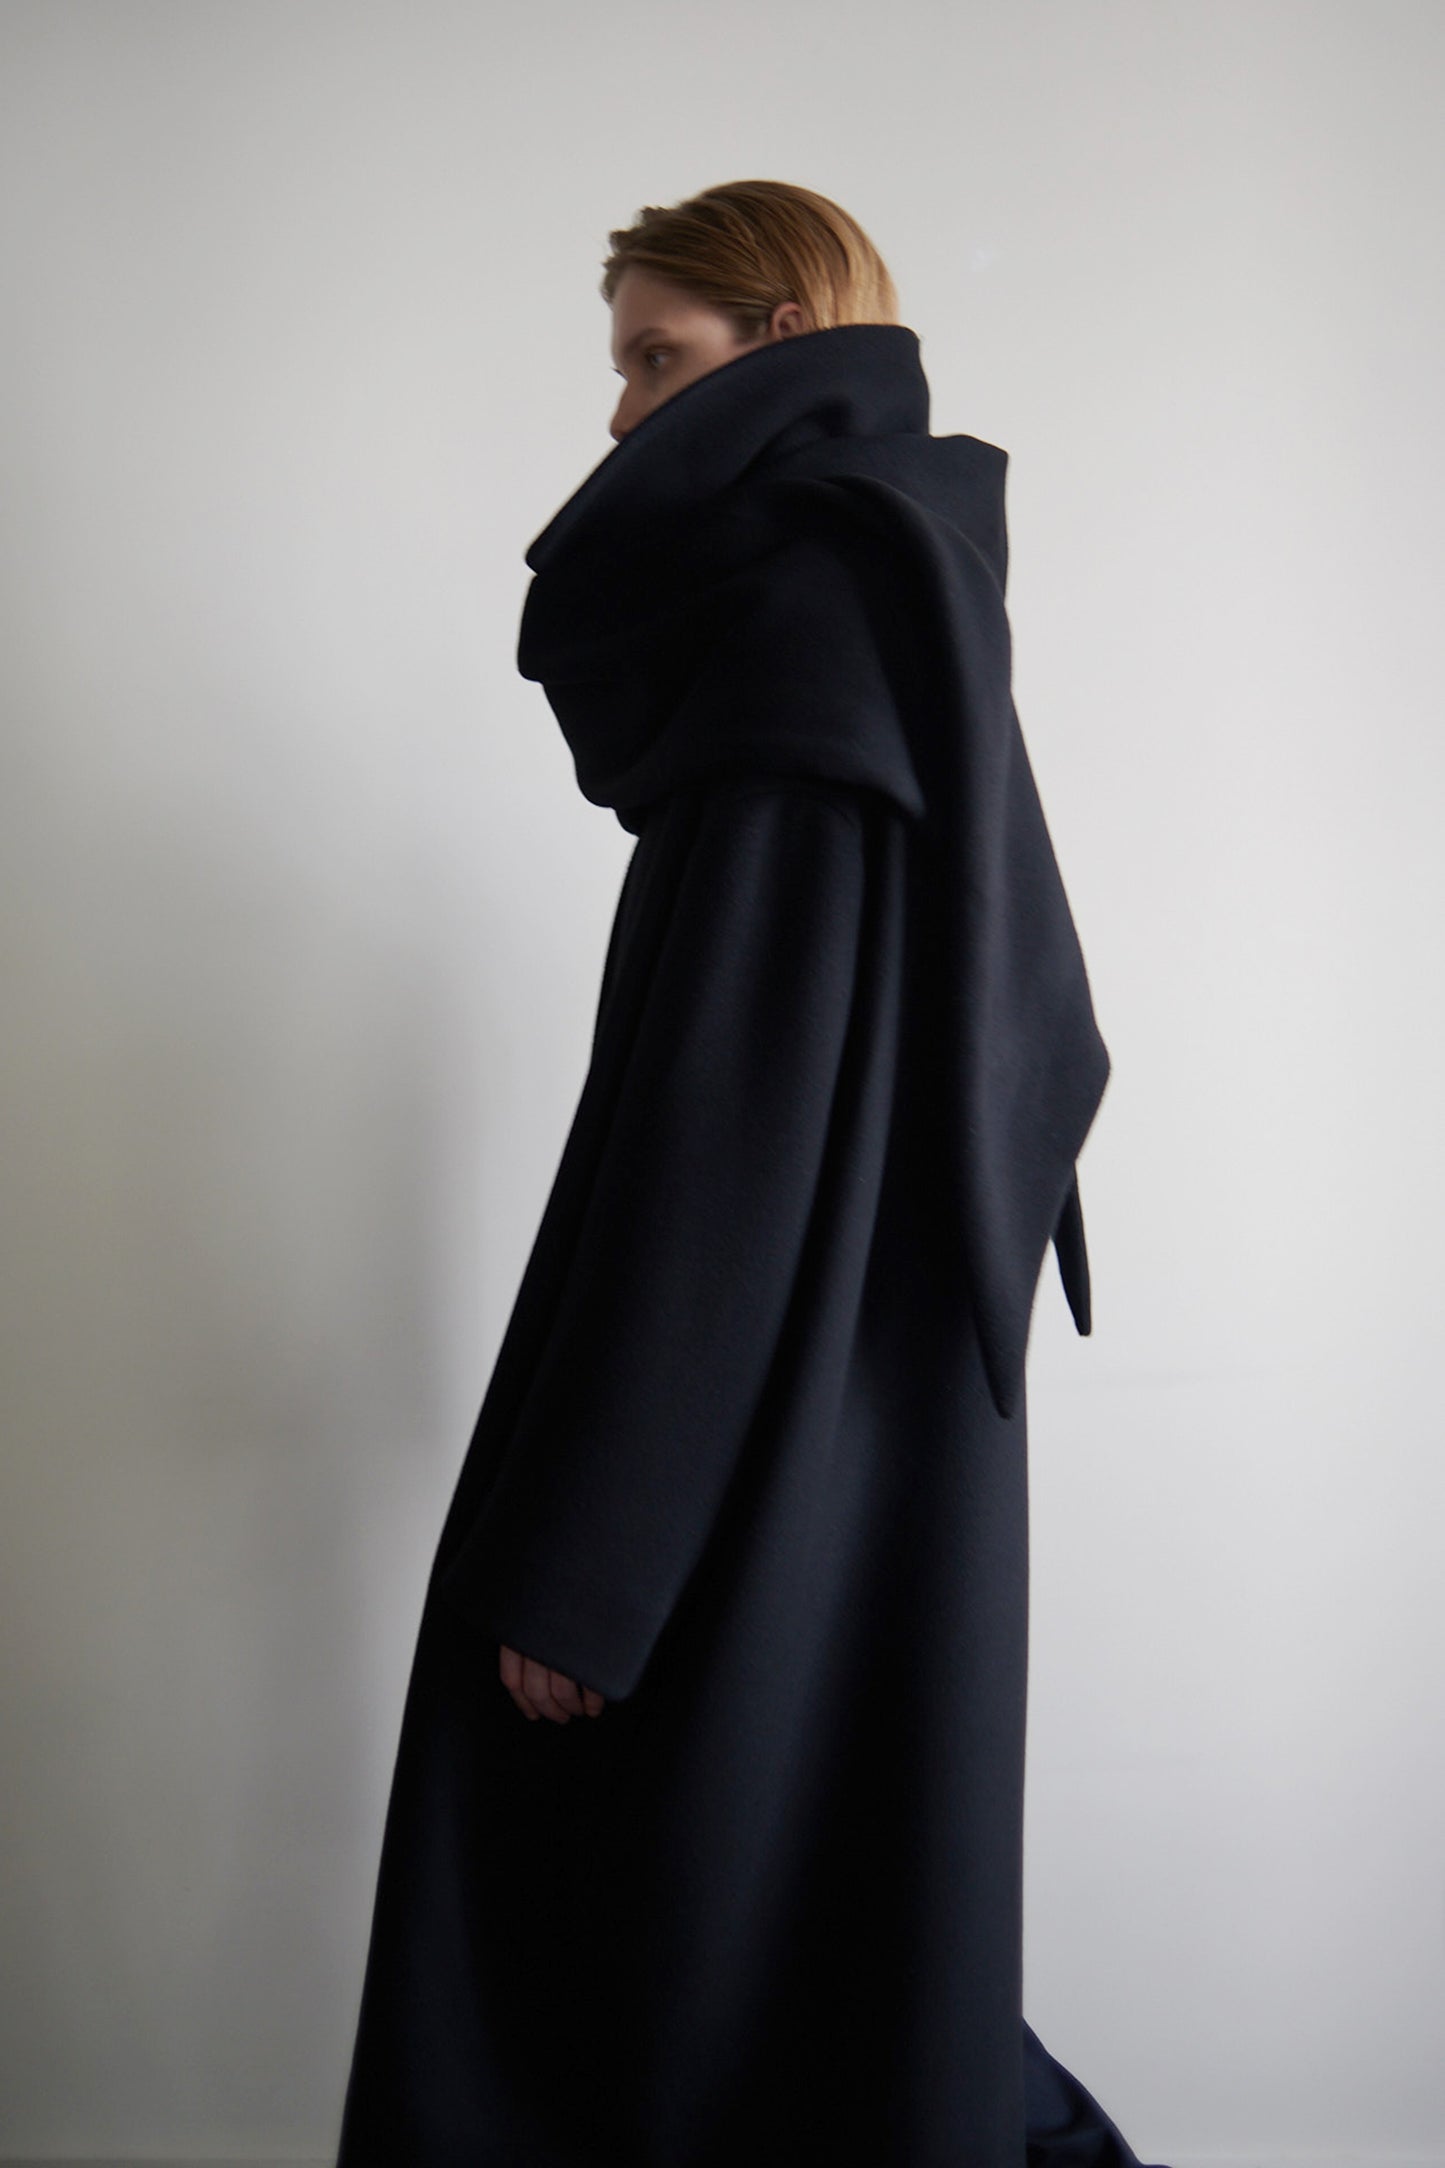 Banshee Coat in Wool and Cashmere